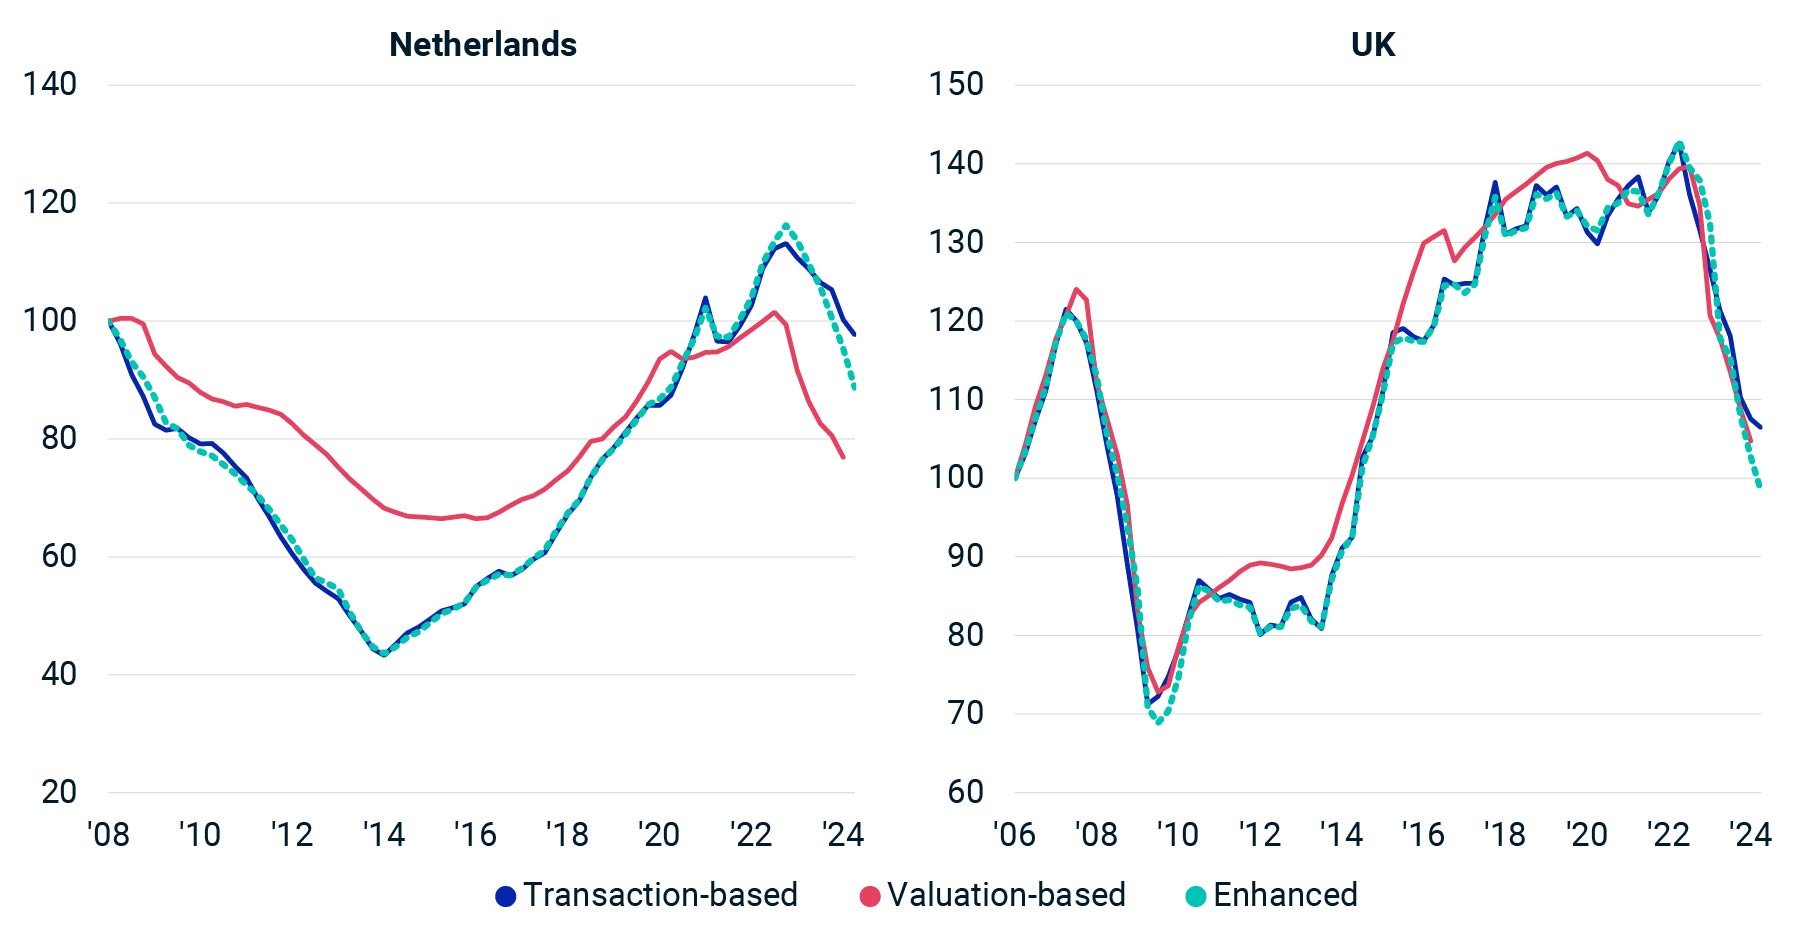 The chart displays three different lines representing three types of metrics for the Netherlands and the UK over a period from approximately 2006 to 2024. Each line corresponds to a different type of index: Transaction-based, Valuation-based, and Enhanced. The y-axis represents index value.